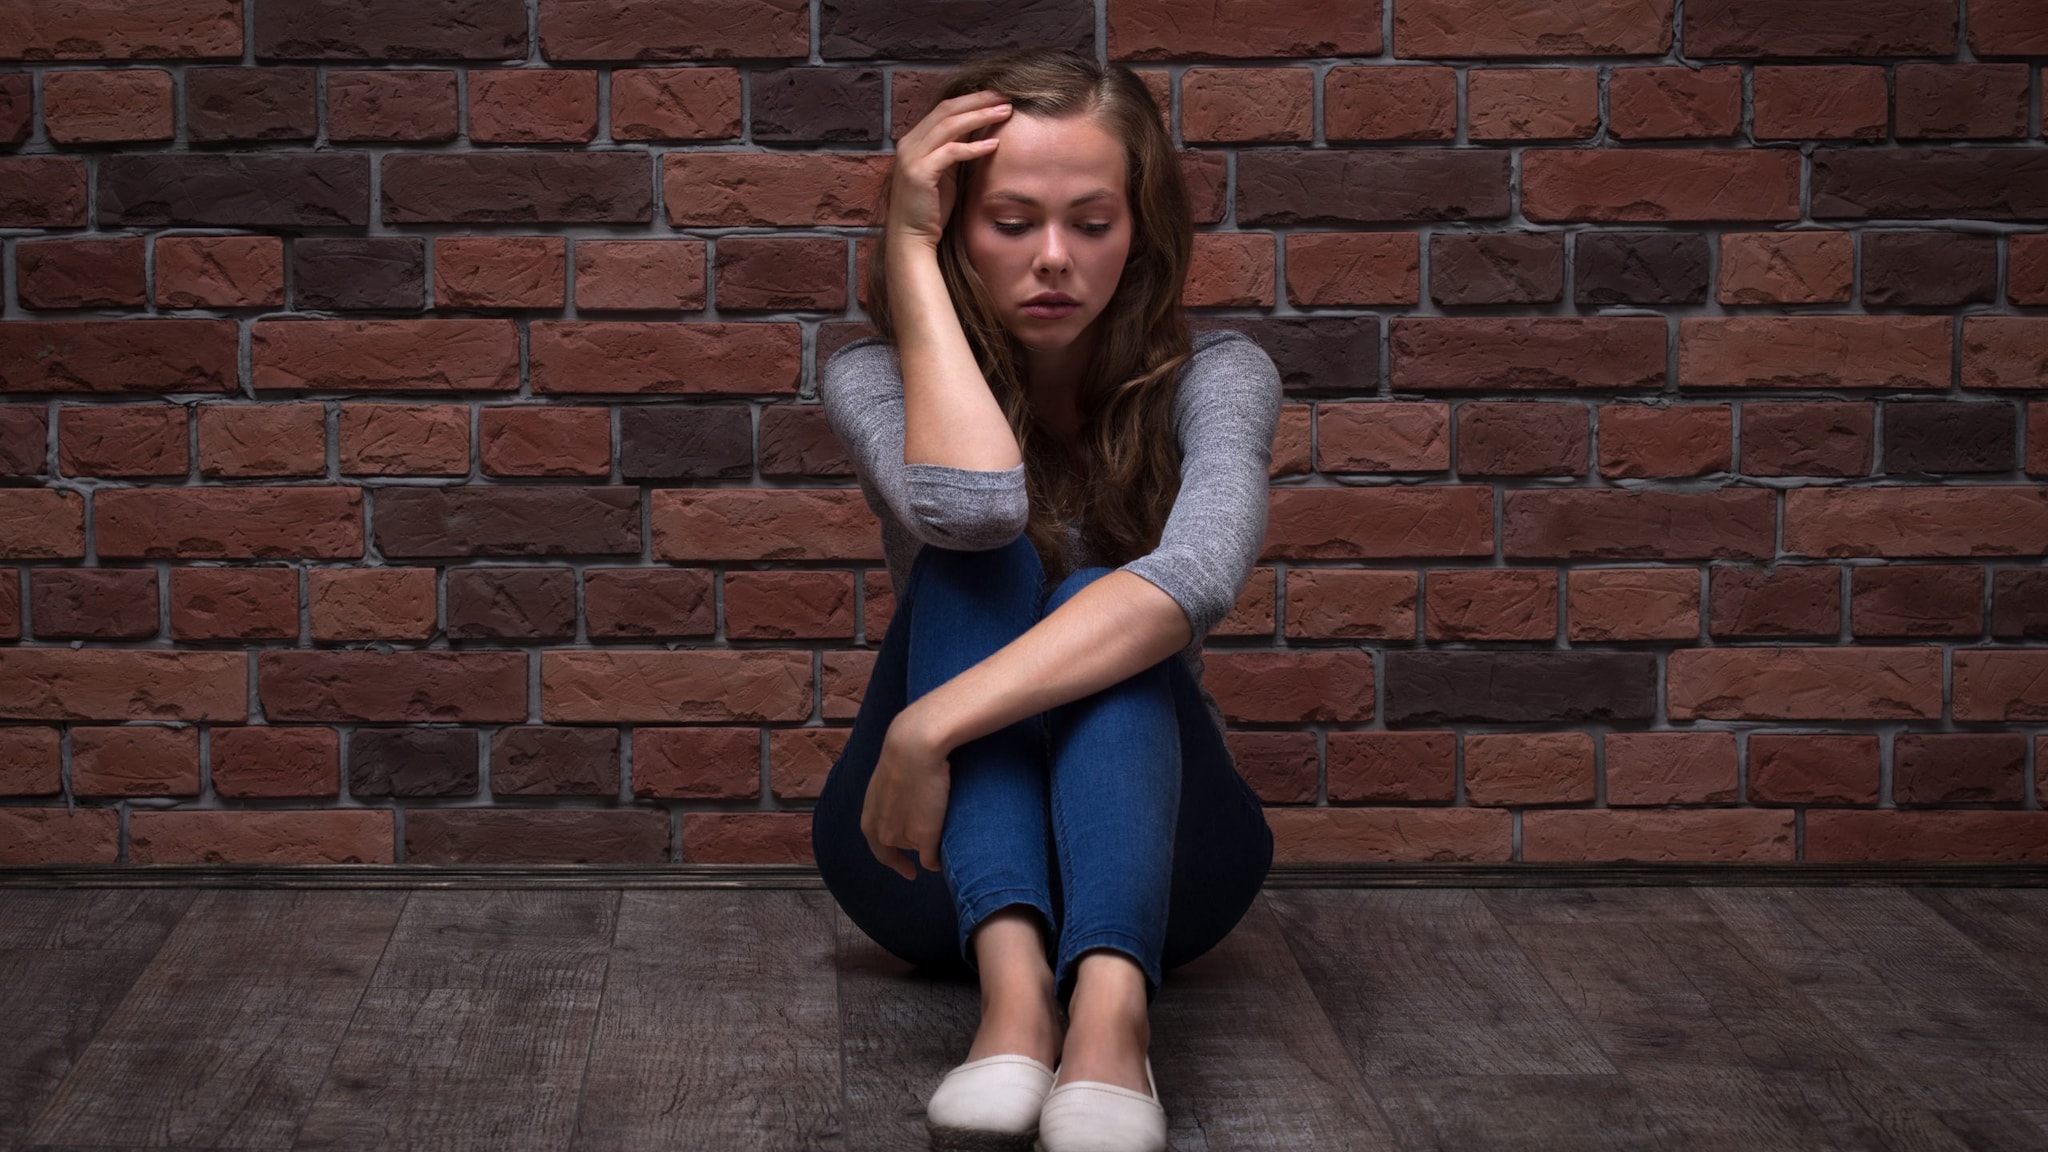 Depressed Teenager Girl Sitting against a brick wall